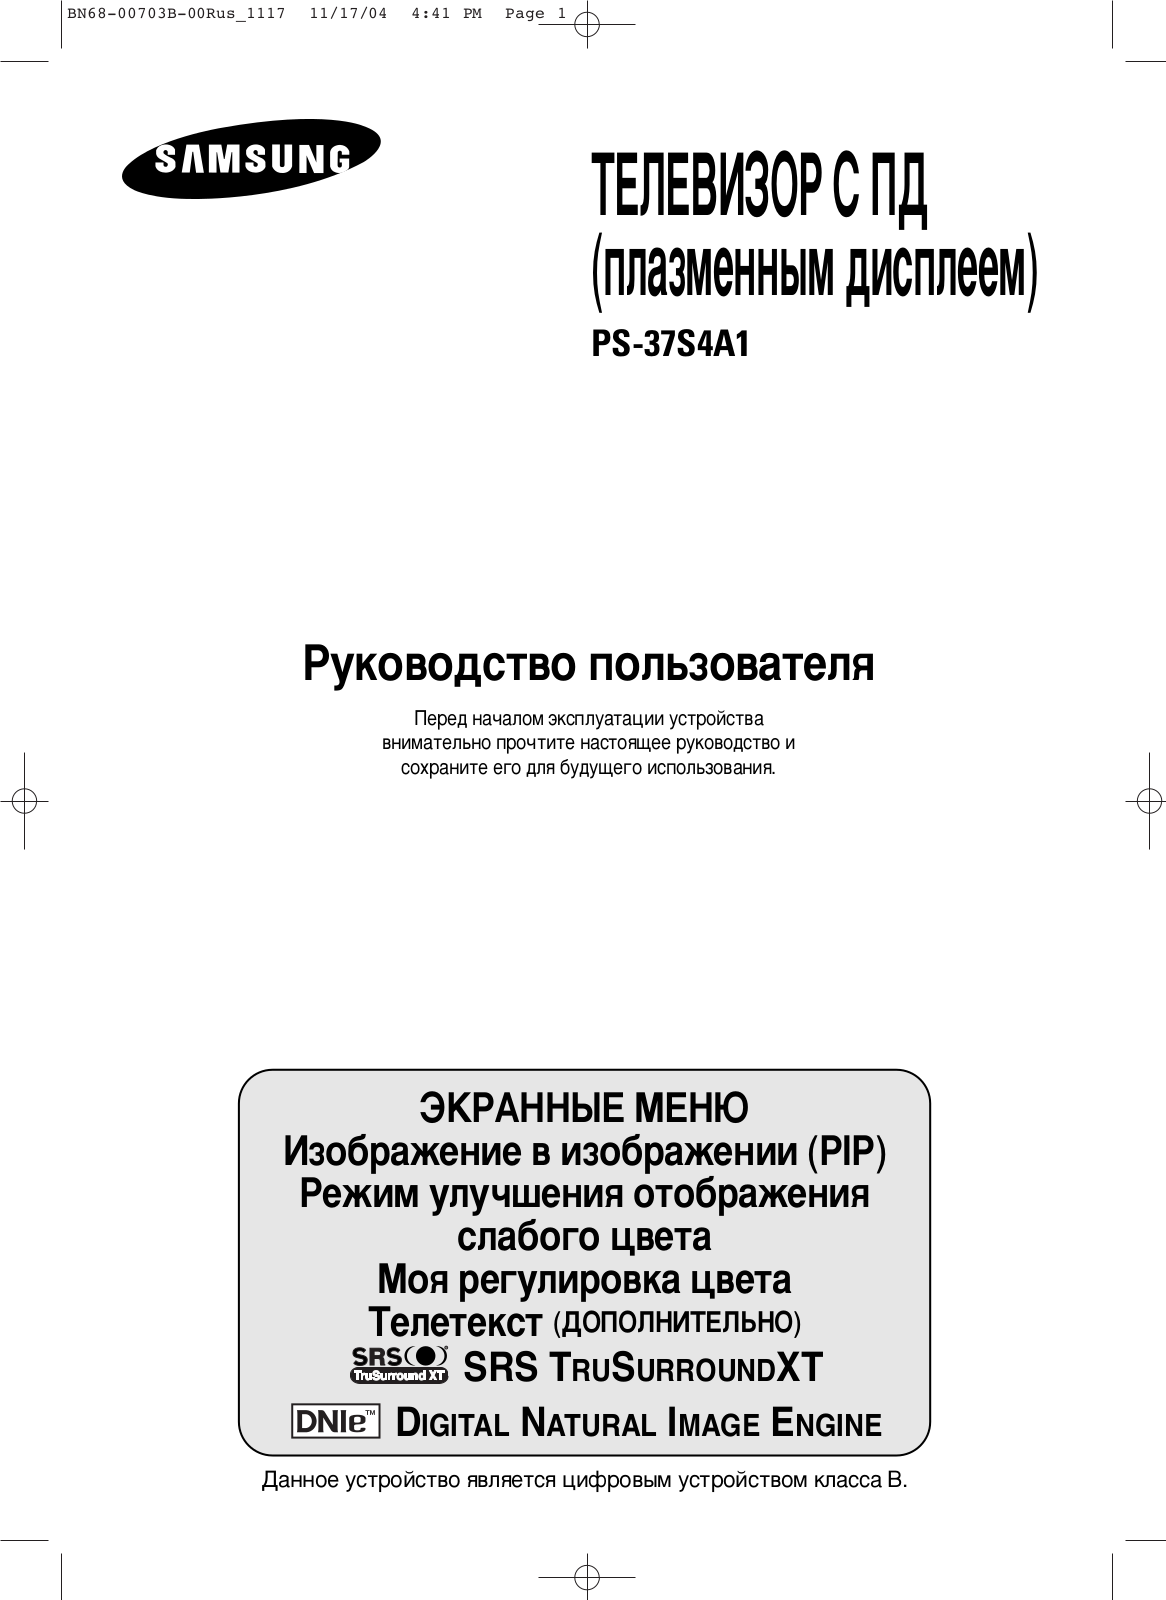 Samsung PS-37S4A1 User Manual